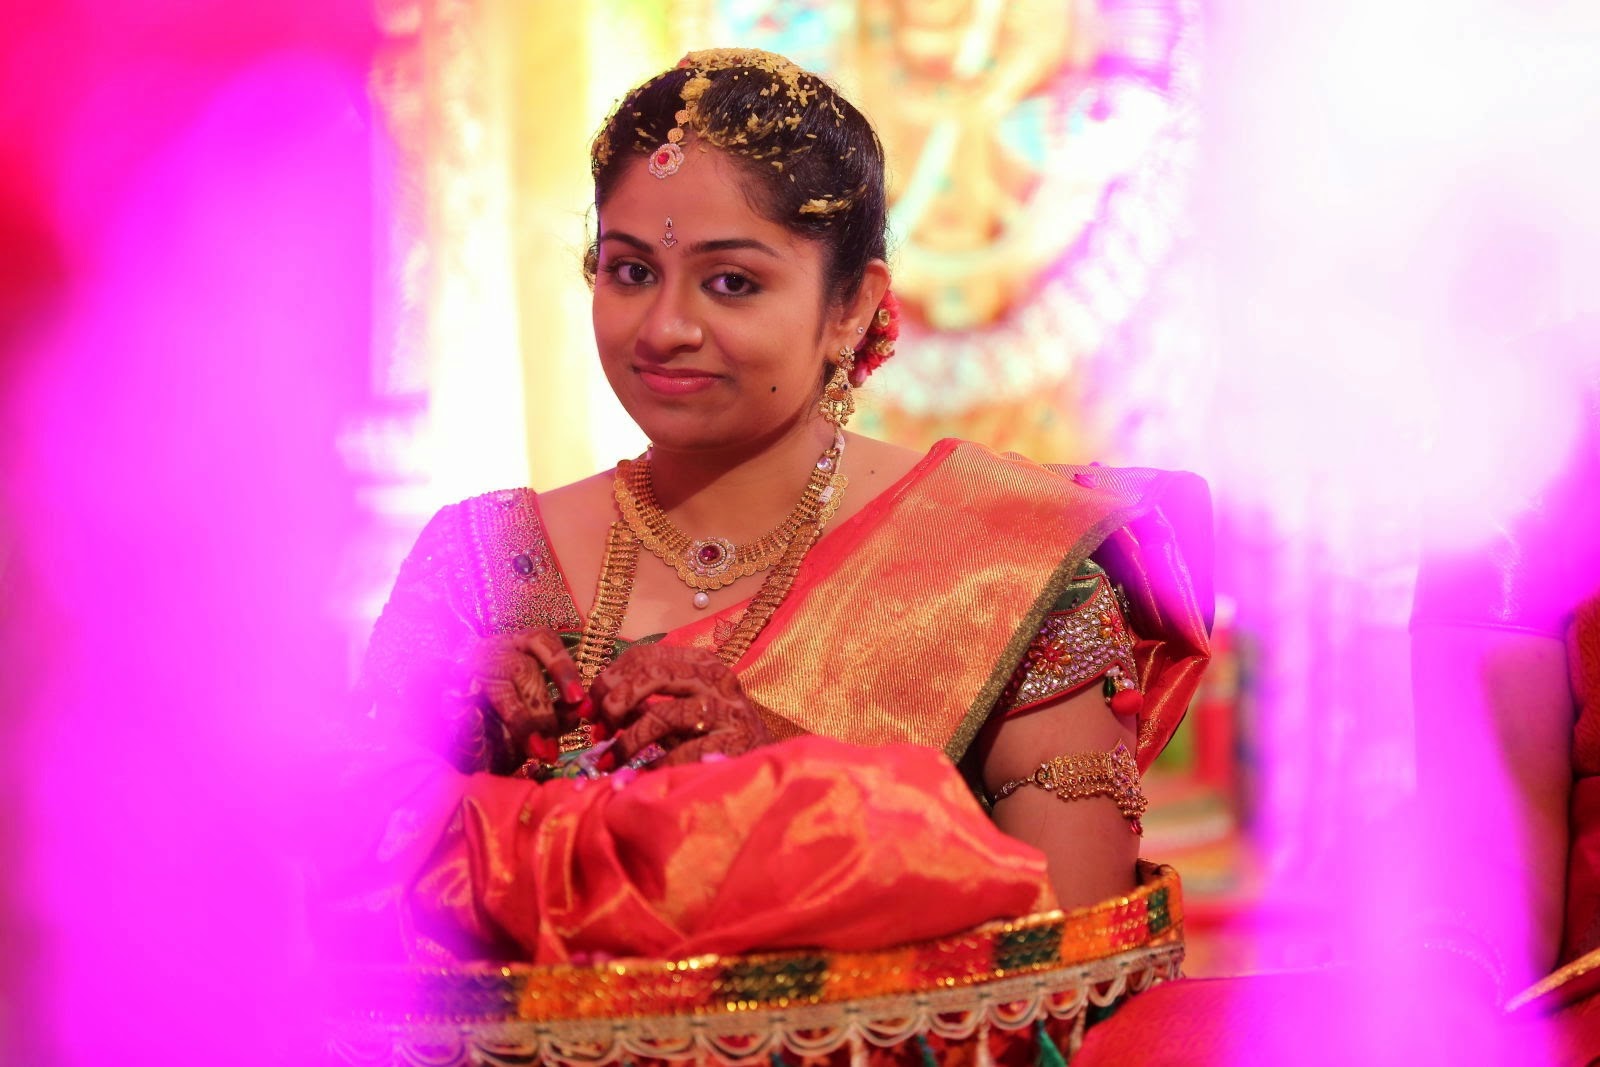 hero wallpapers heroine photo gallery,sari,pink,ceremony,tradition,event